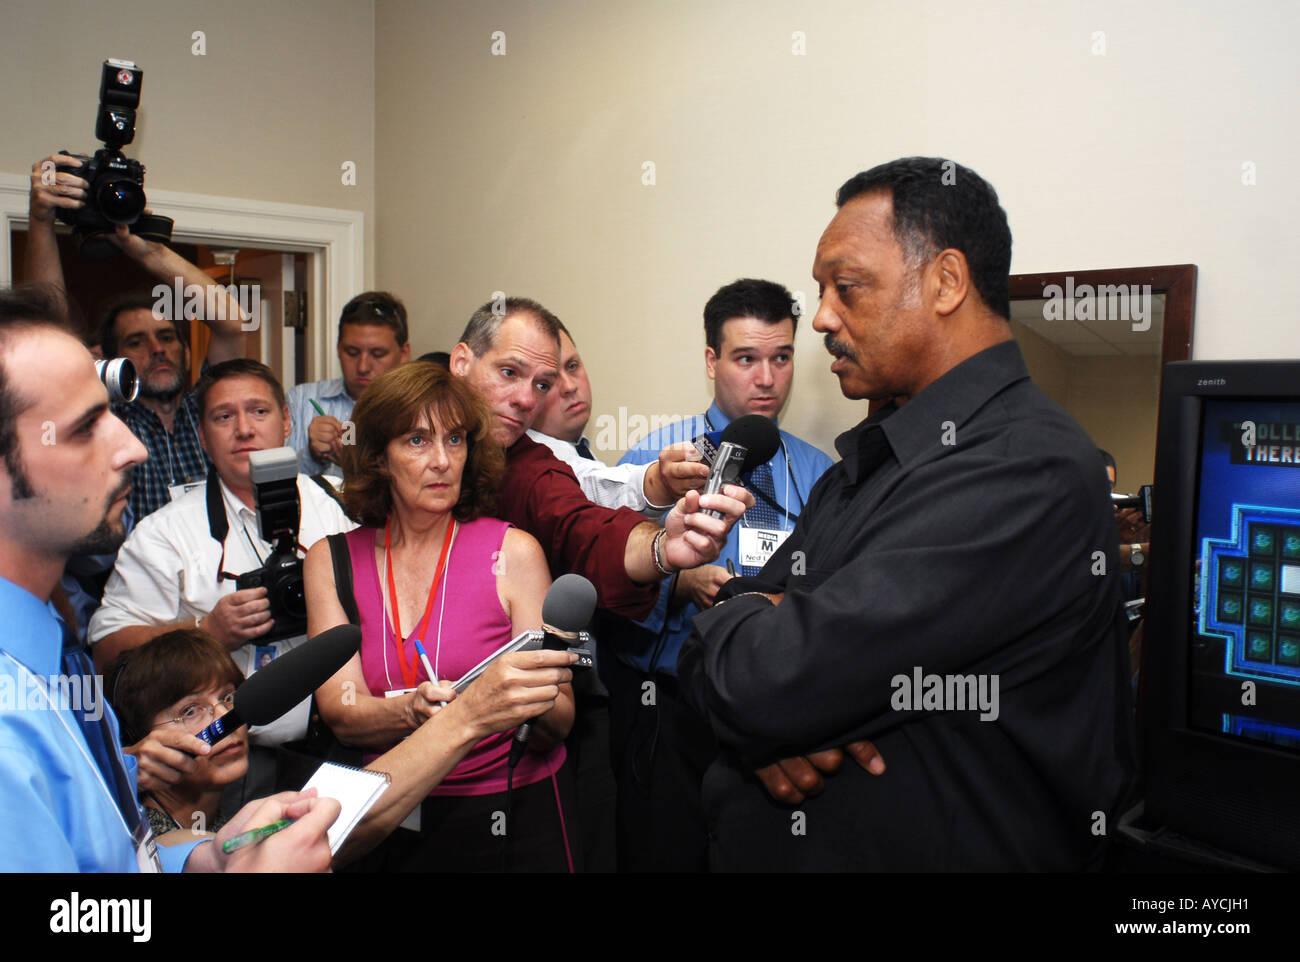 Reverend Jesse Jackson Civil Rights Leader with Reporters at a polical event Stock Photo